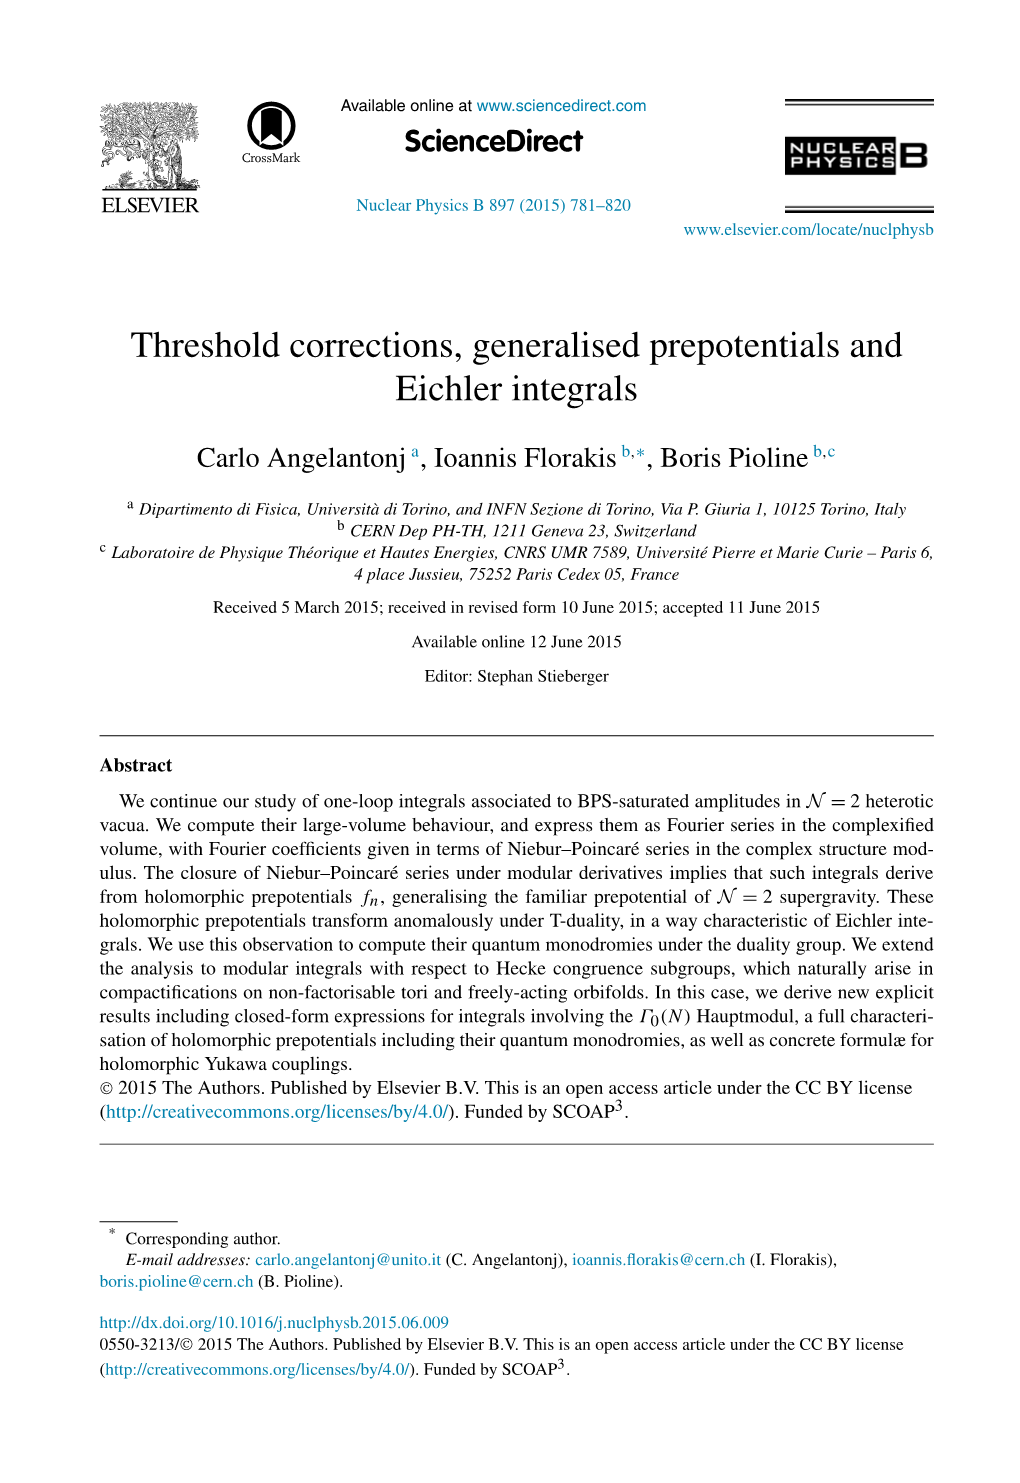 Threshold Corrections, Generalised Prepotentials and Eichler Integrals